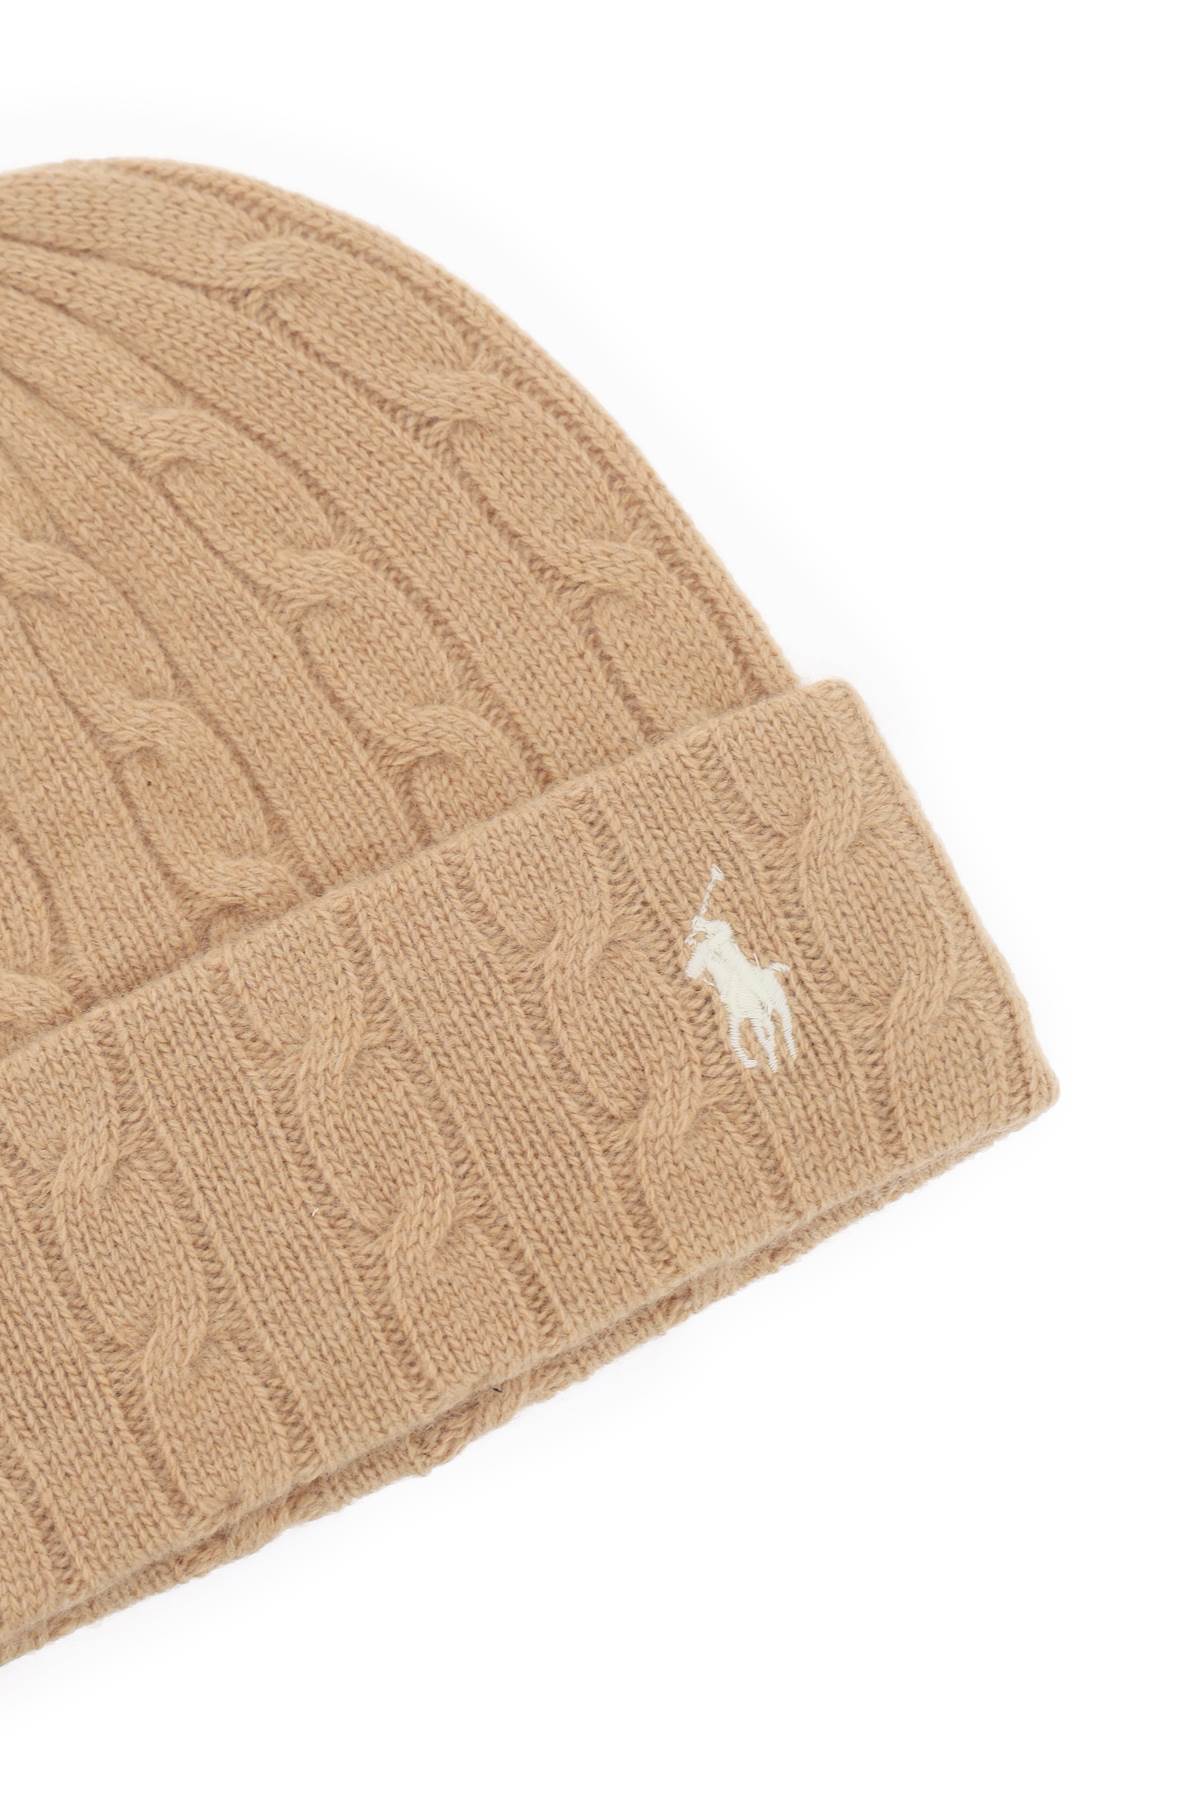 Polo Ralph Lauren Polo ralph lauren cable-knit cashmere and wool beanie hat